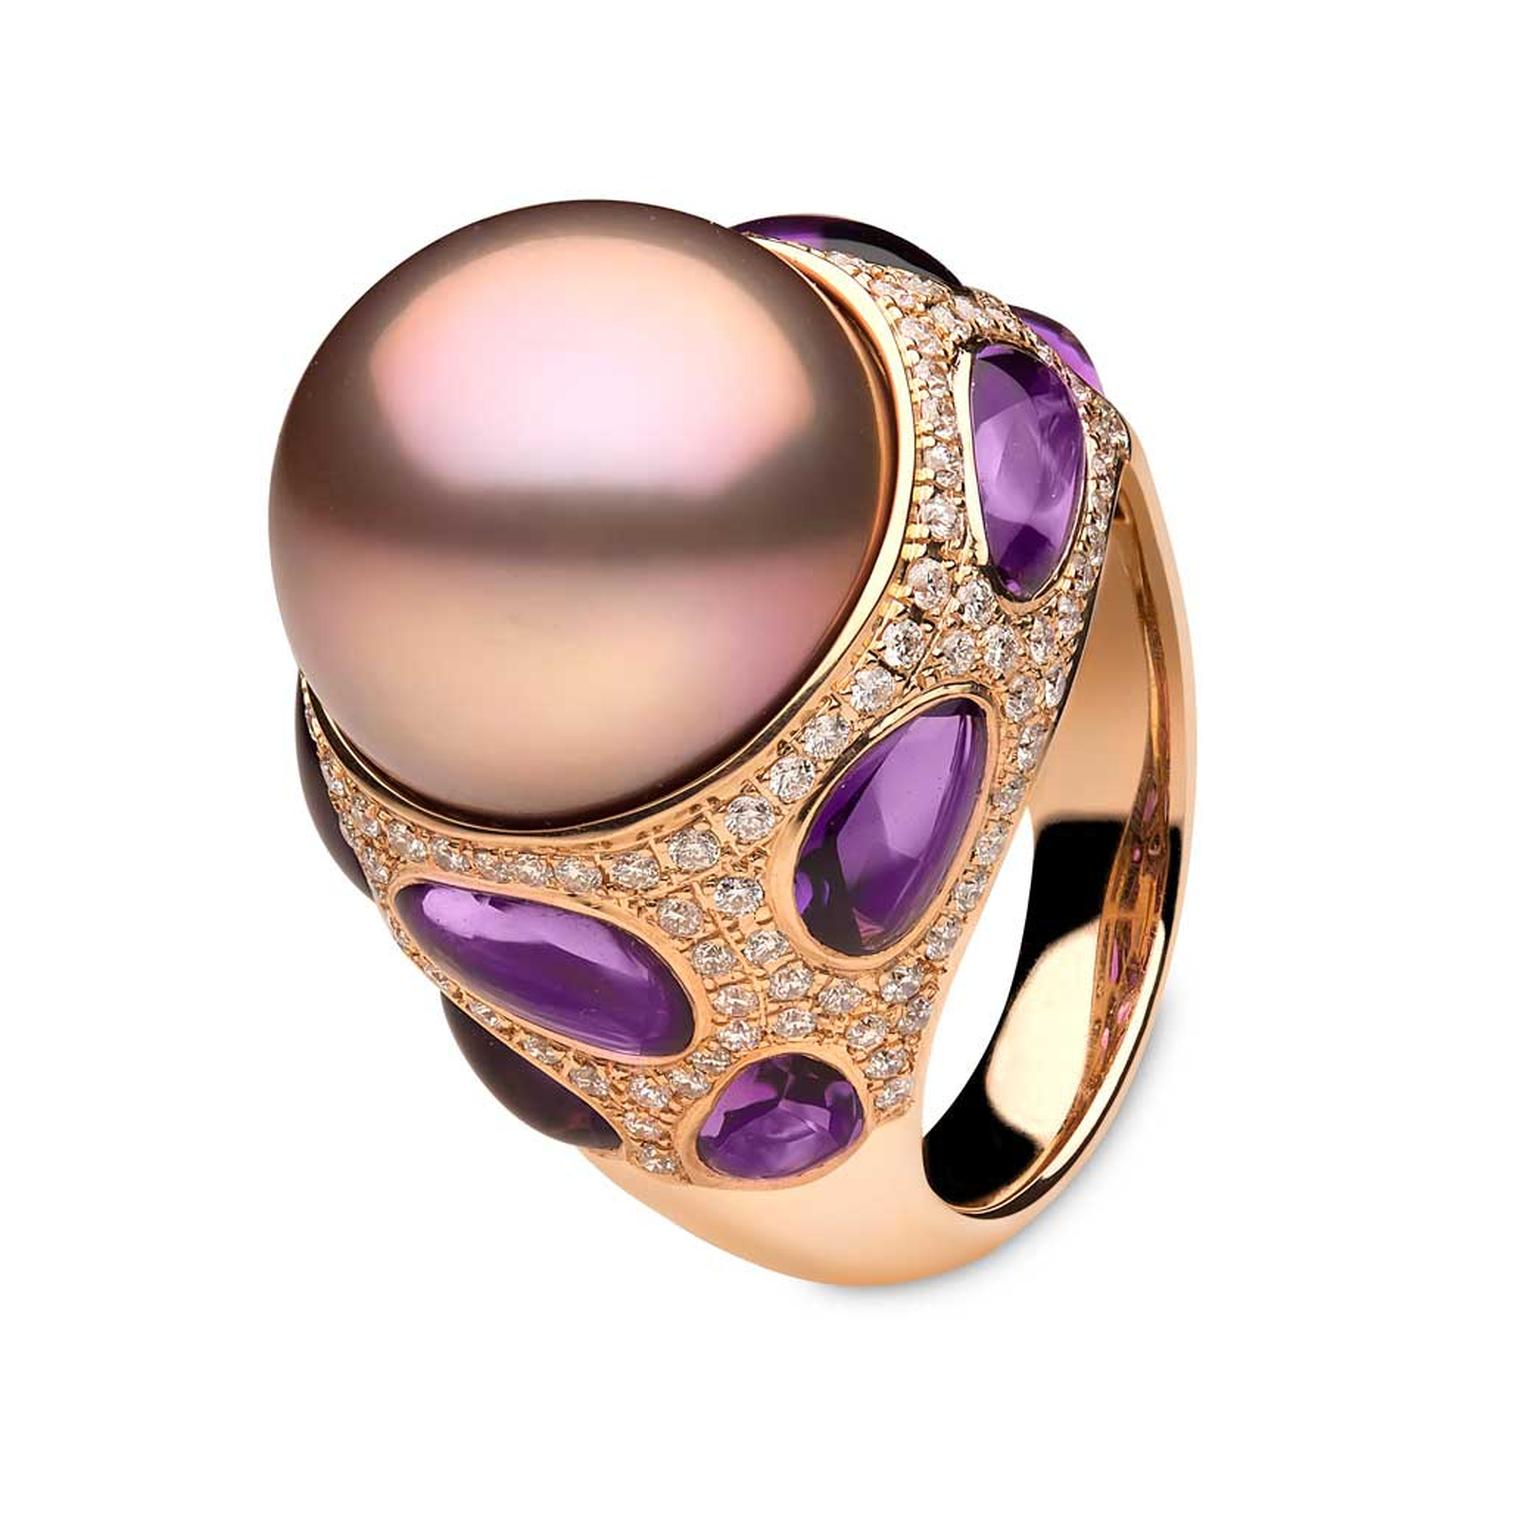 YOKO London Calypso ring with pink freshwater pearl, amethysts and diamonds